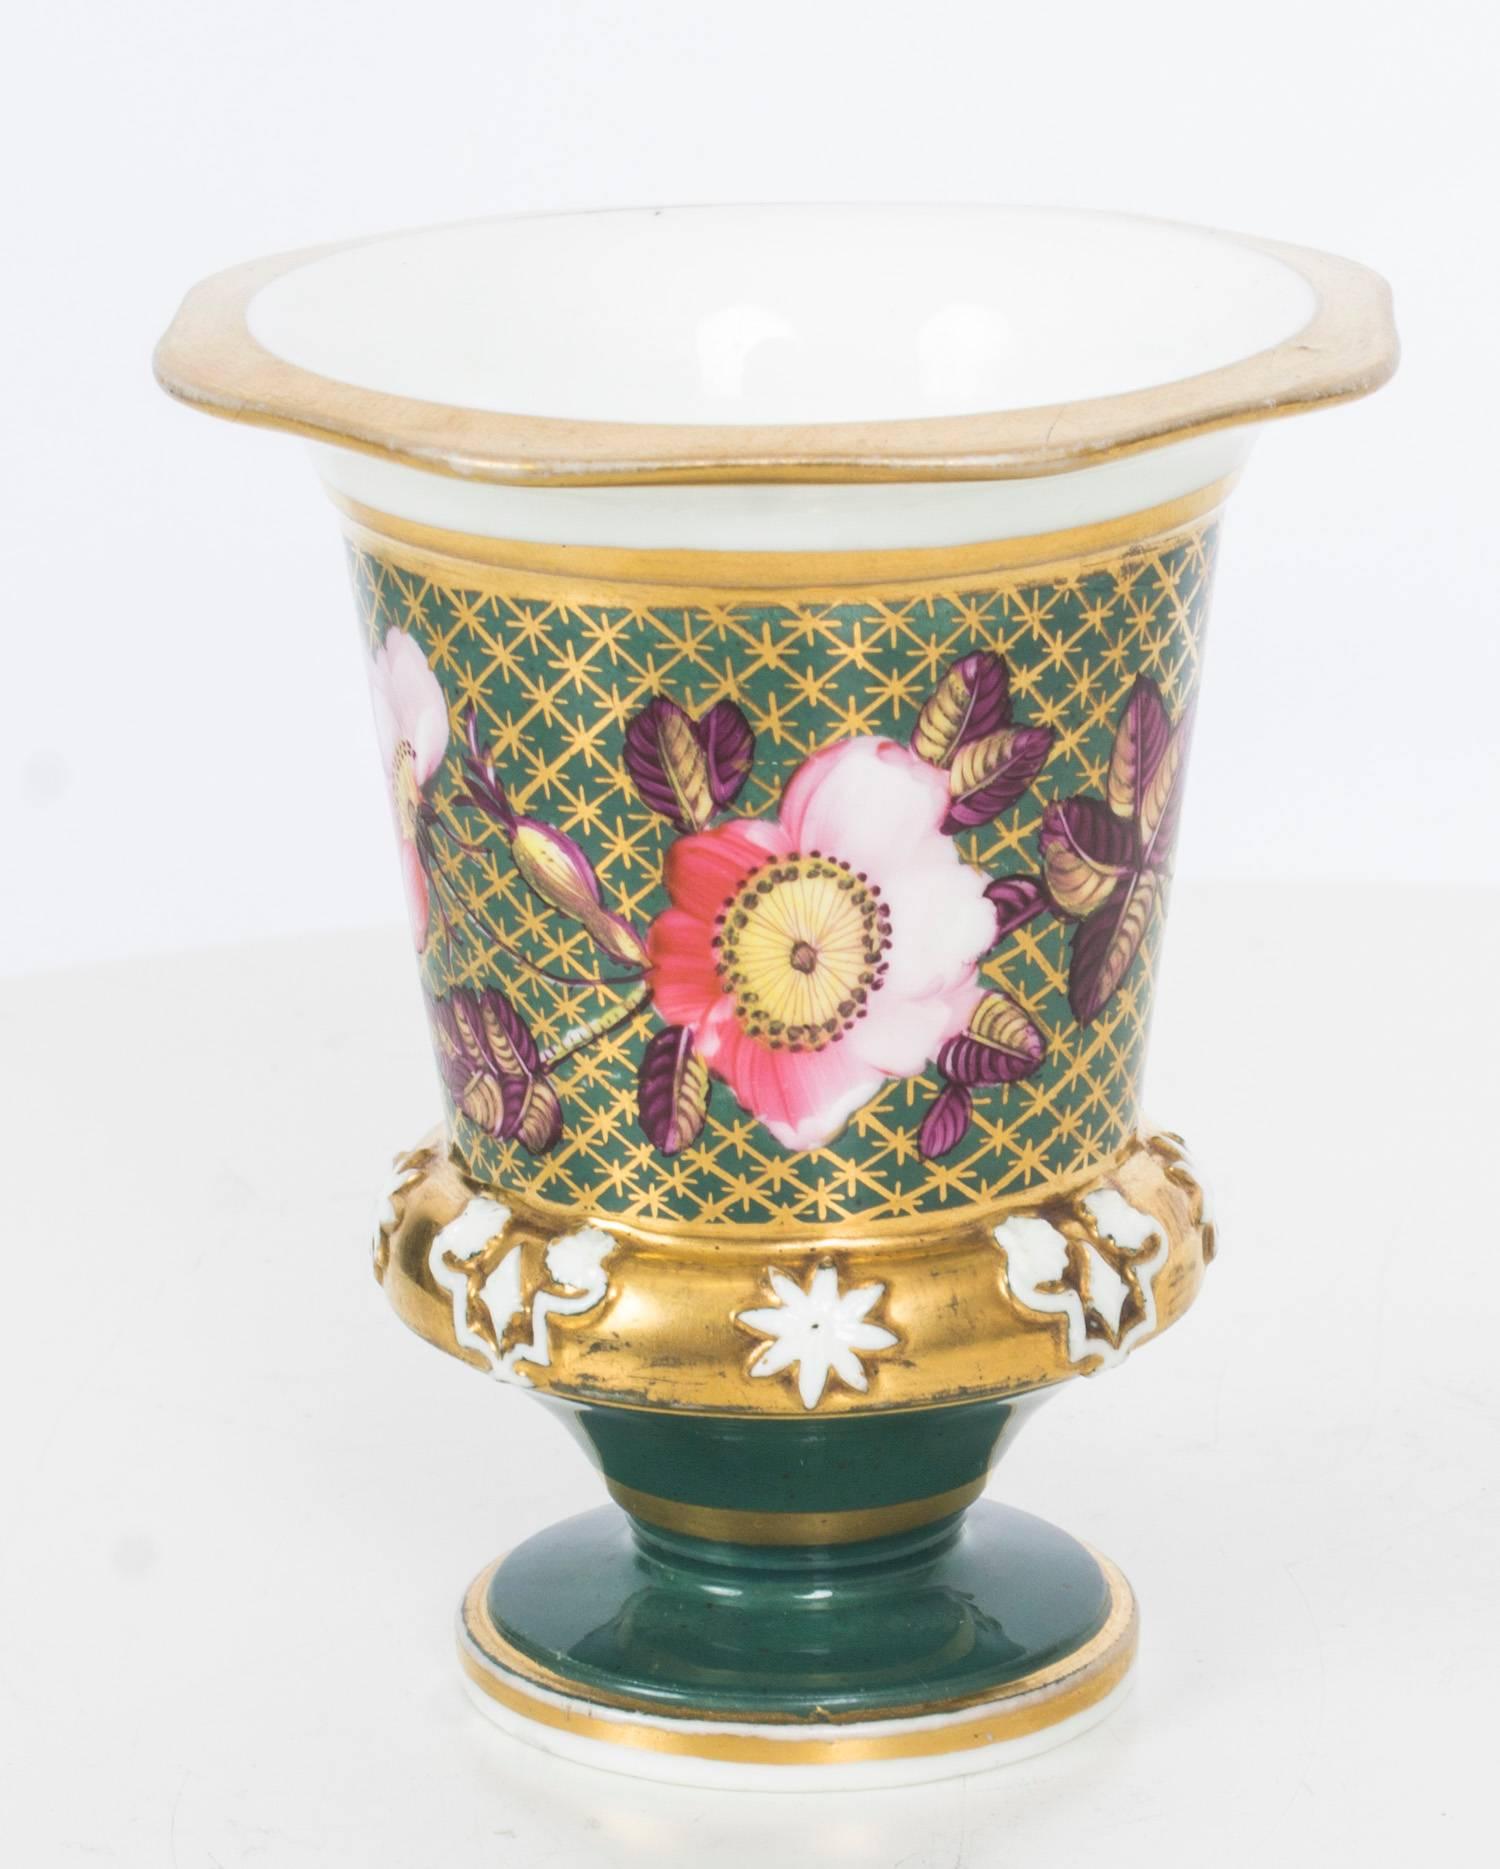 This is a truly superb pair of hand painted English Regency porcelain beaker matchpots or spill vases, circa 1820 in date.

Beautifully hand-painted with flowers on a green ground with exquisite gilded decoration, one with gilt pattern number 922